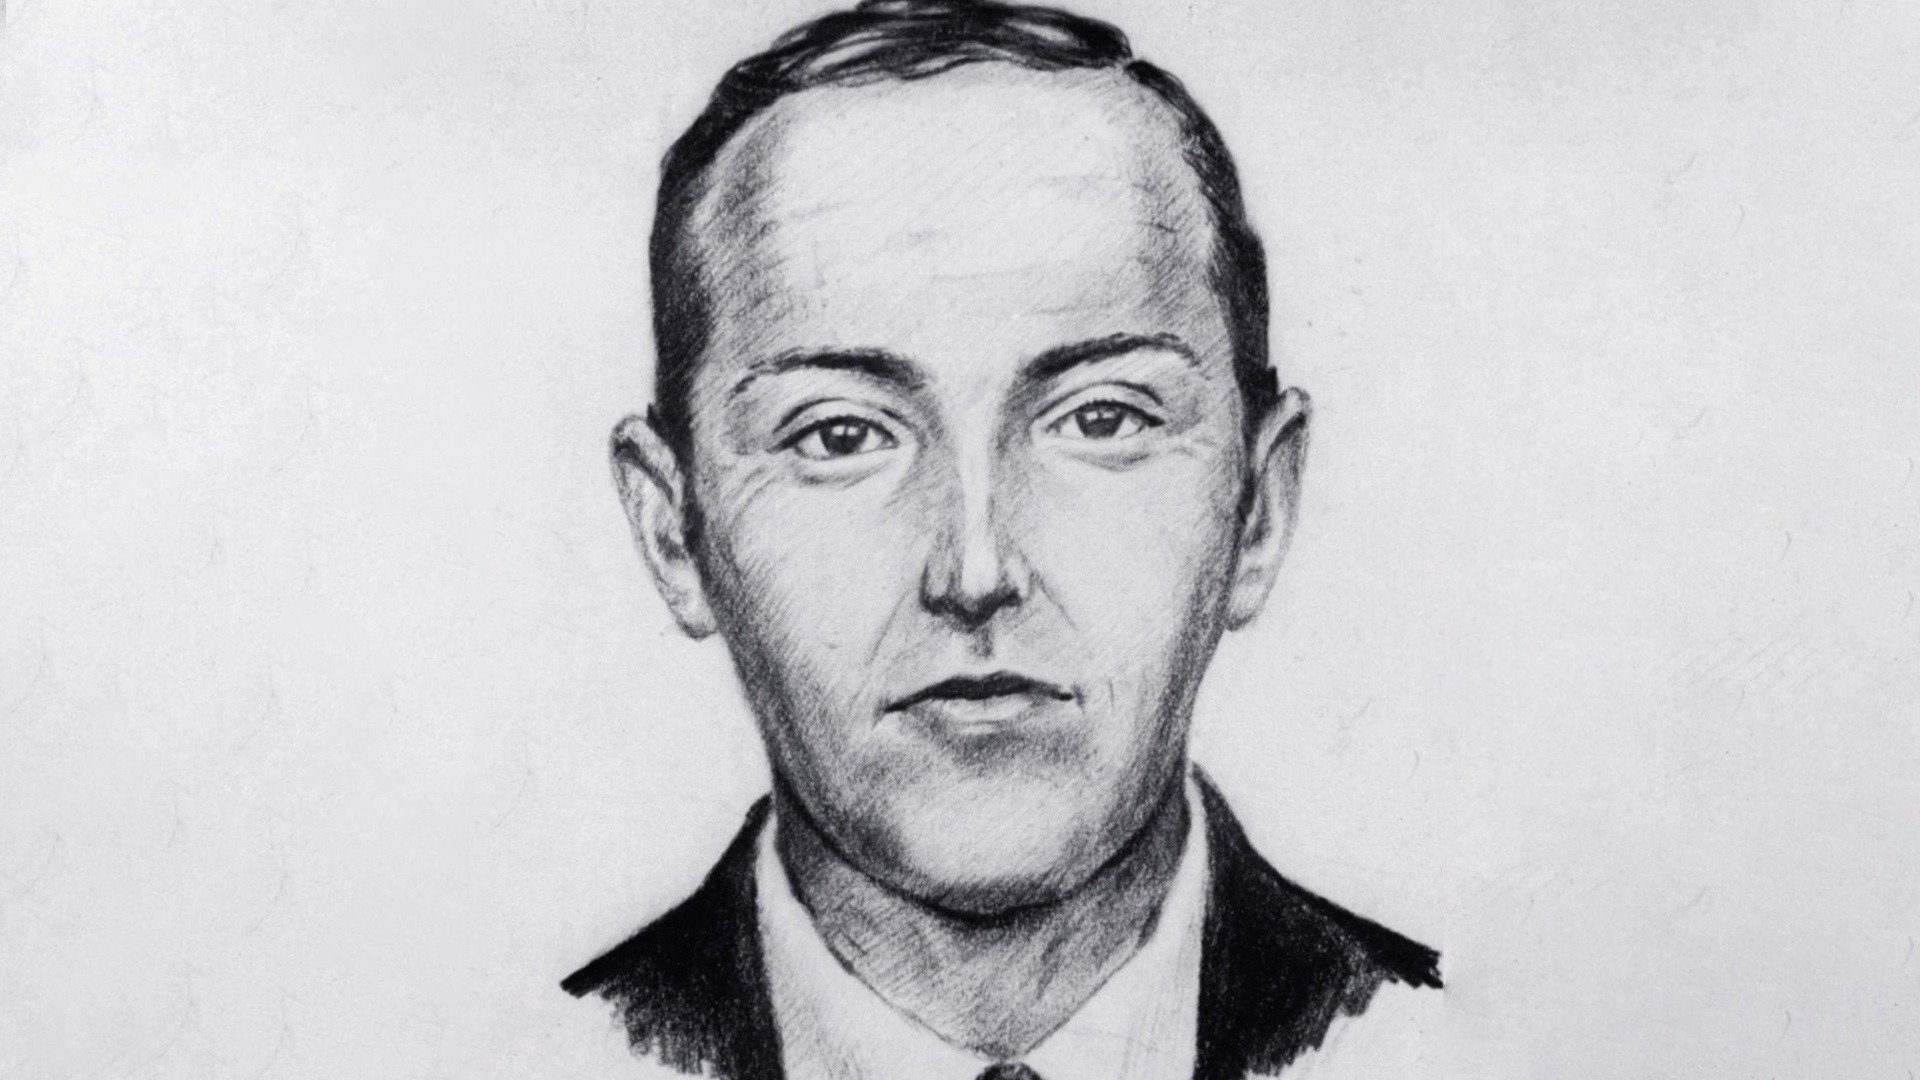 14. Who Is D.B. Cooper?